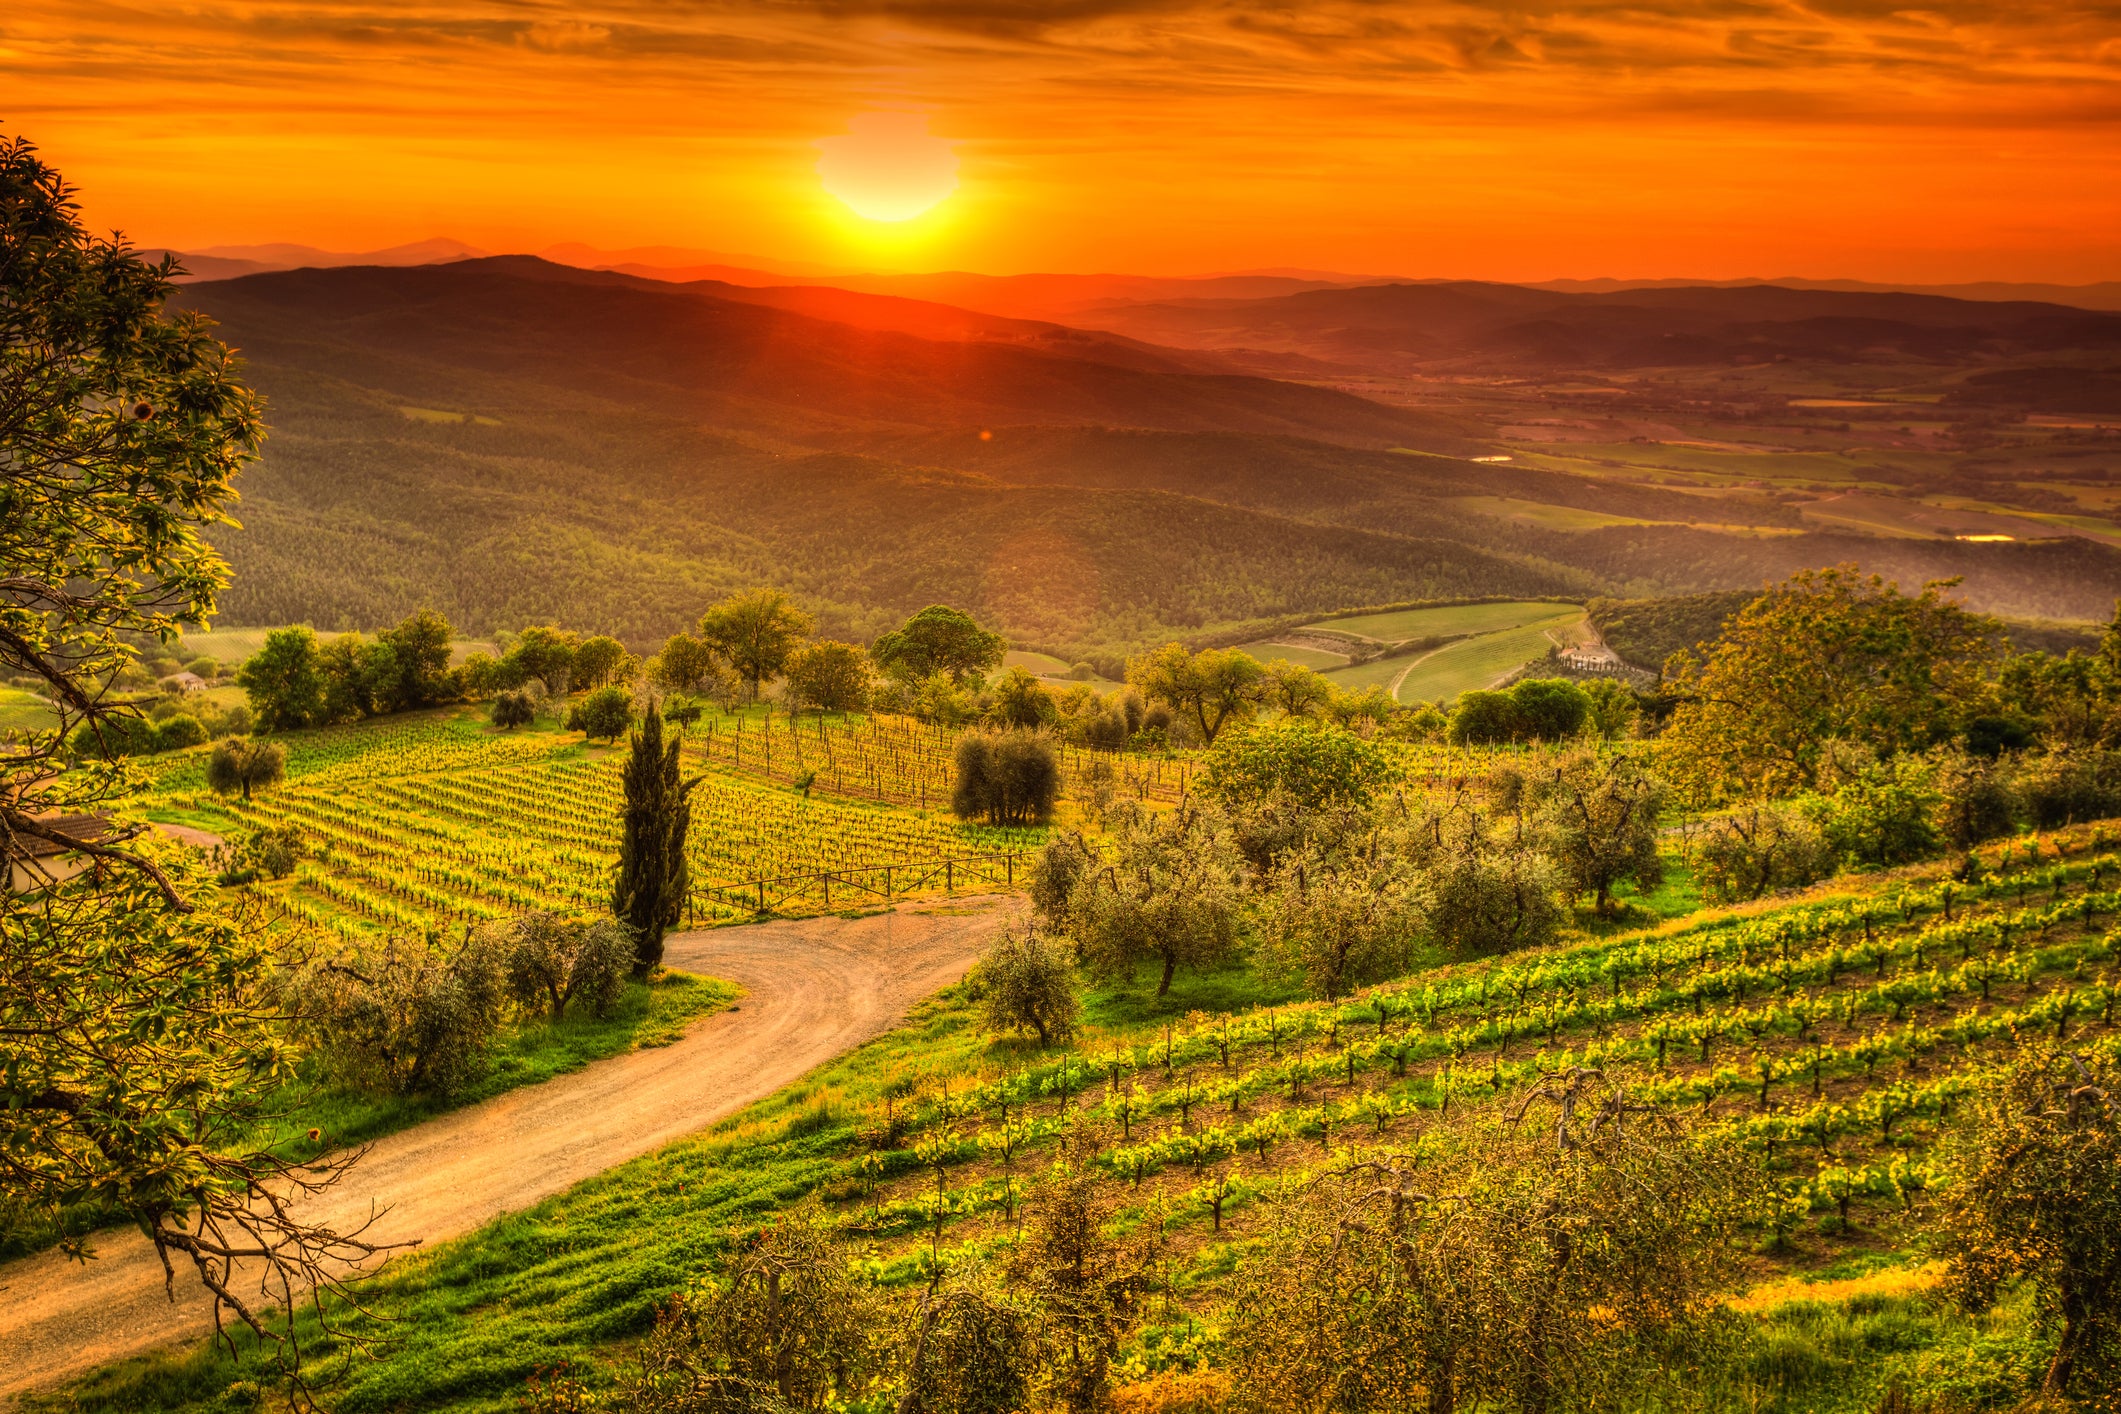 Admire the rolling hills and beautiful sunsets over a glass of the local vino in Tuscany